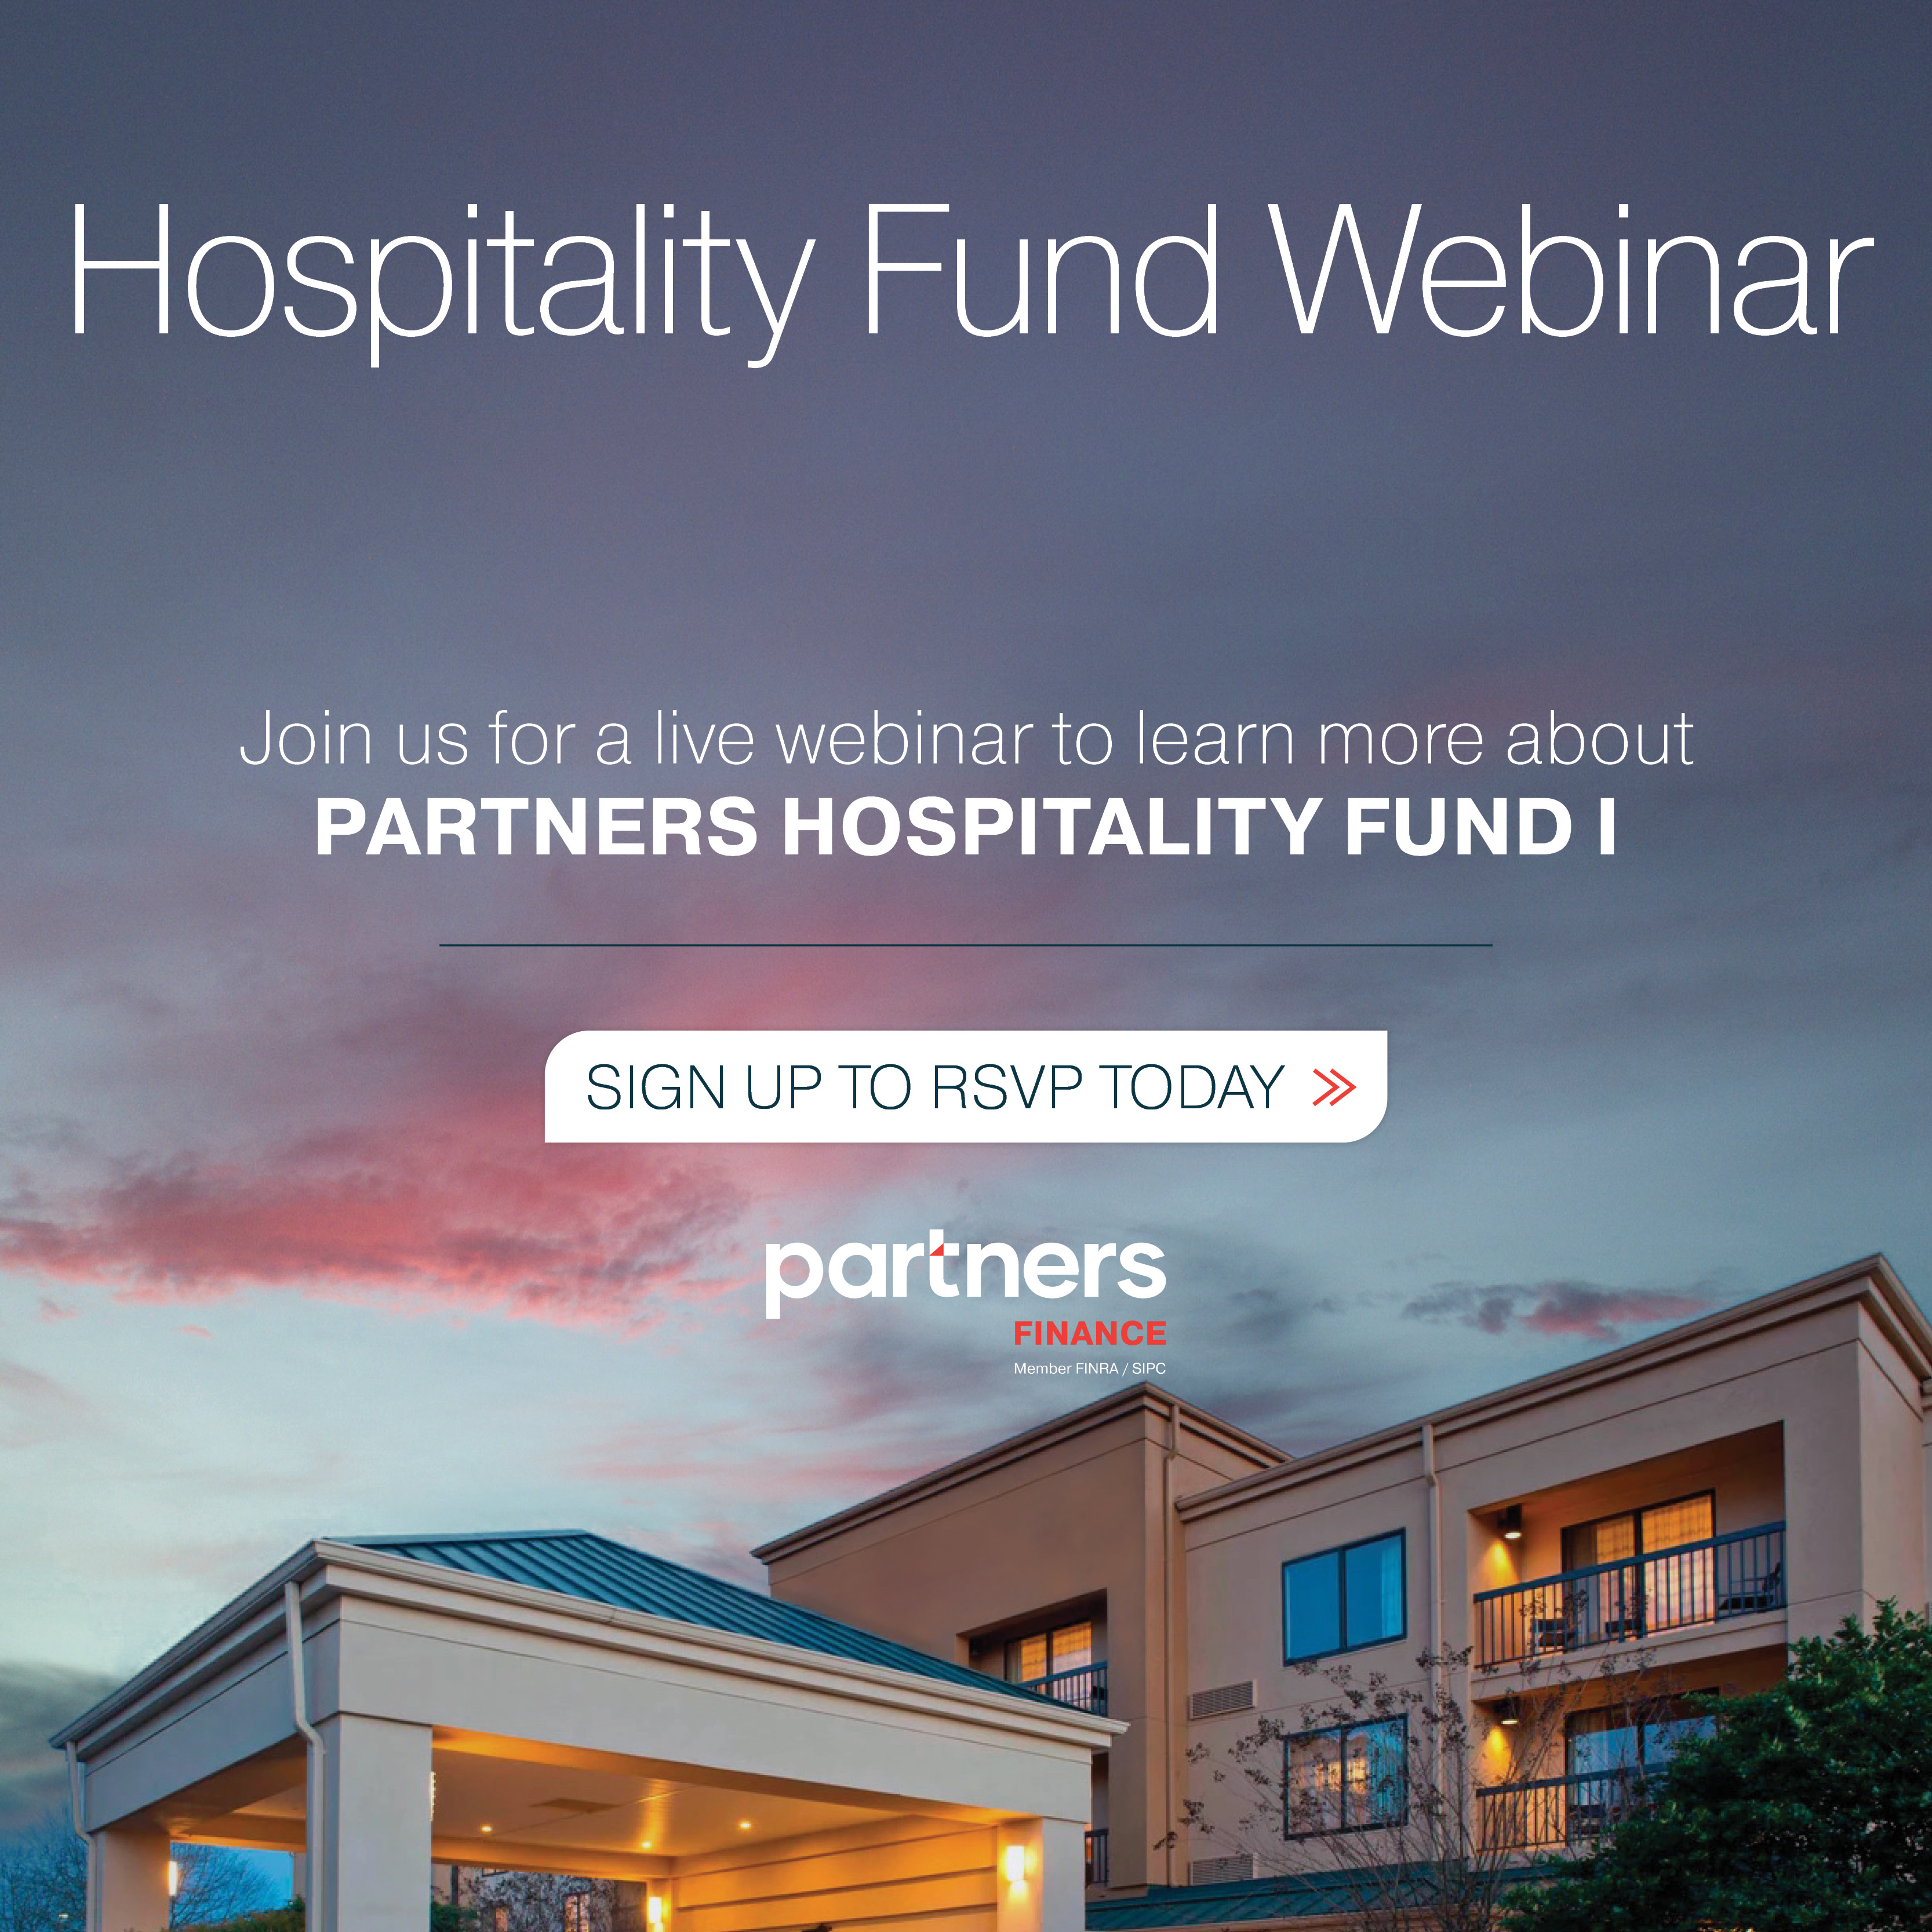 Join Partners Real Estate for a Webinar event to learn about Hospitality Fund I